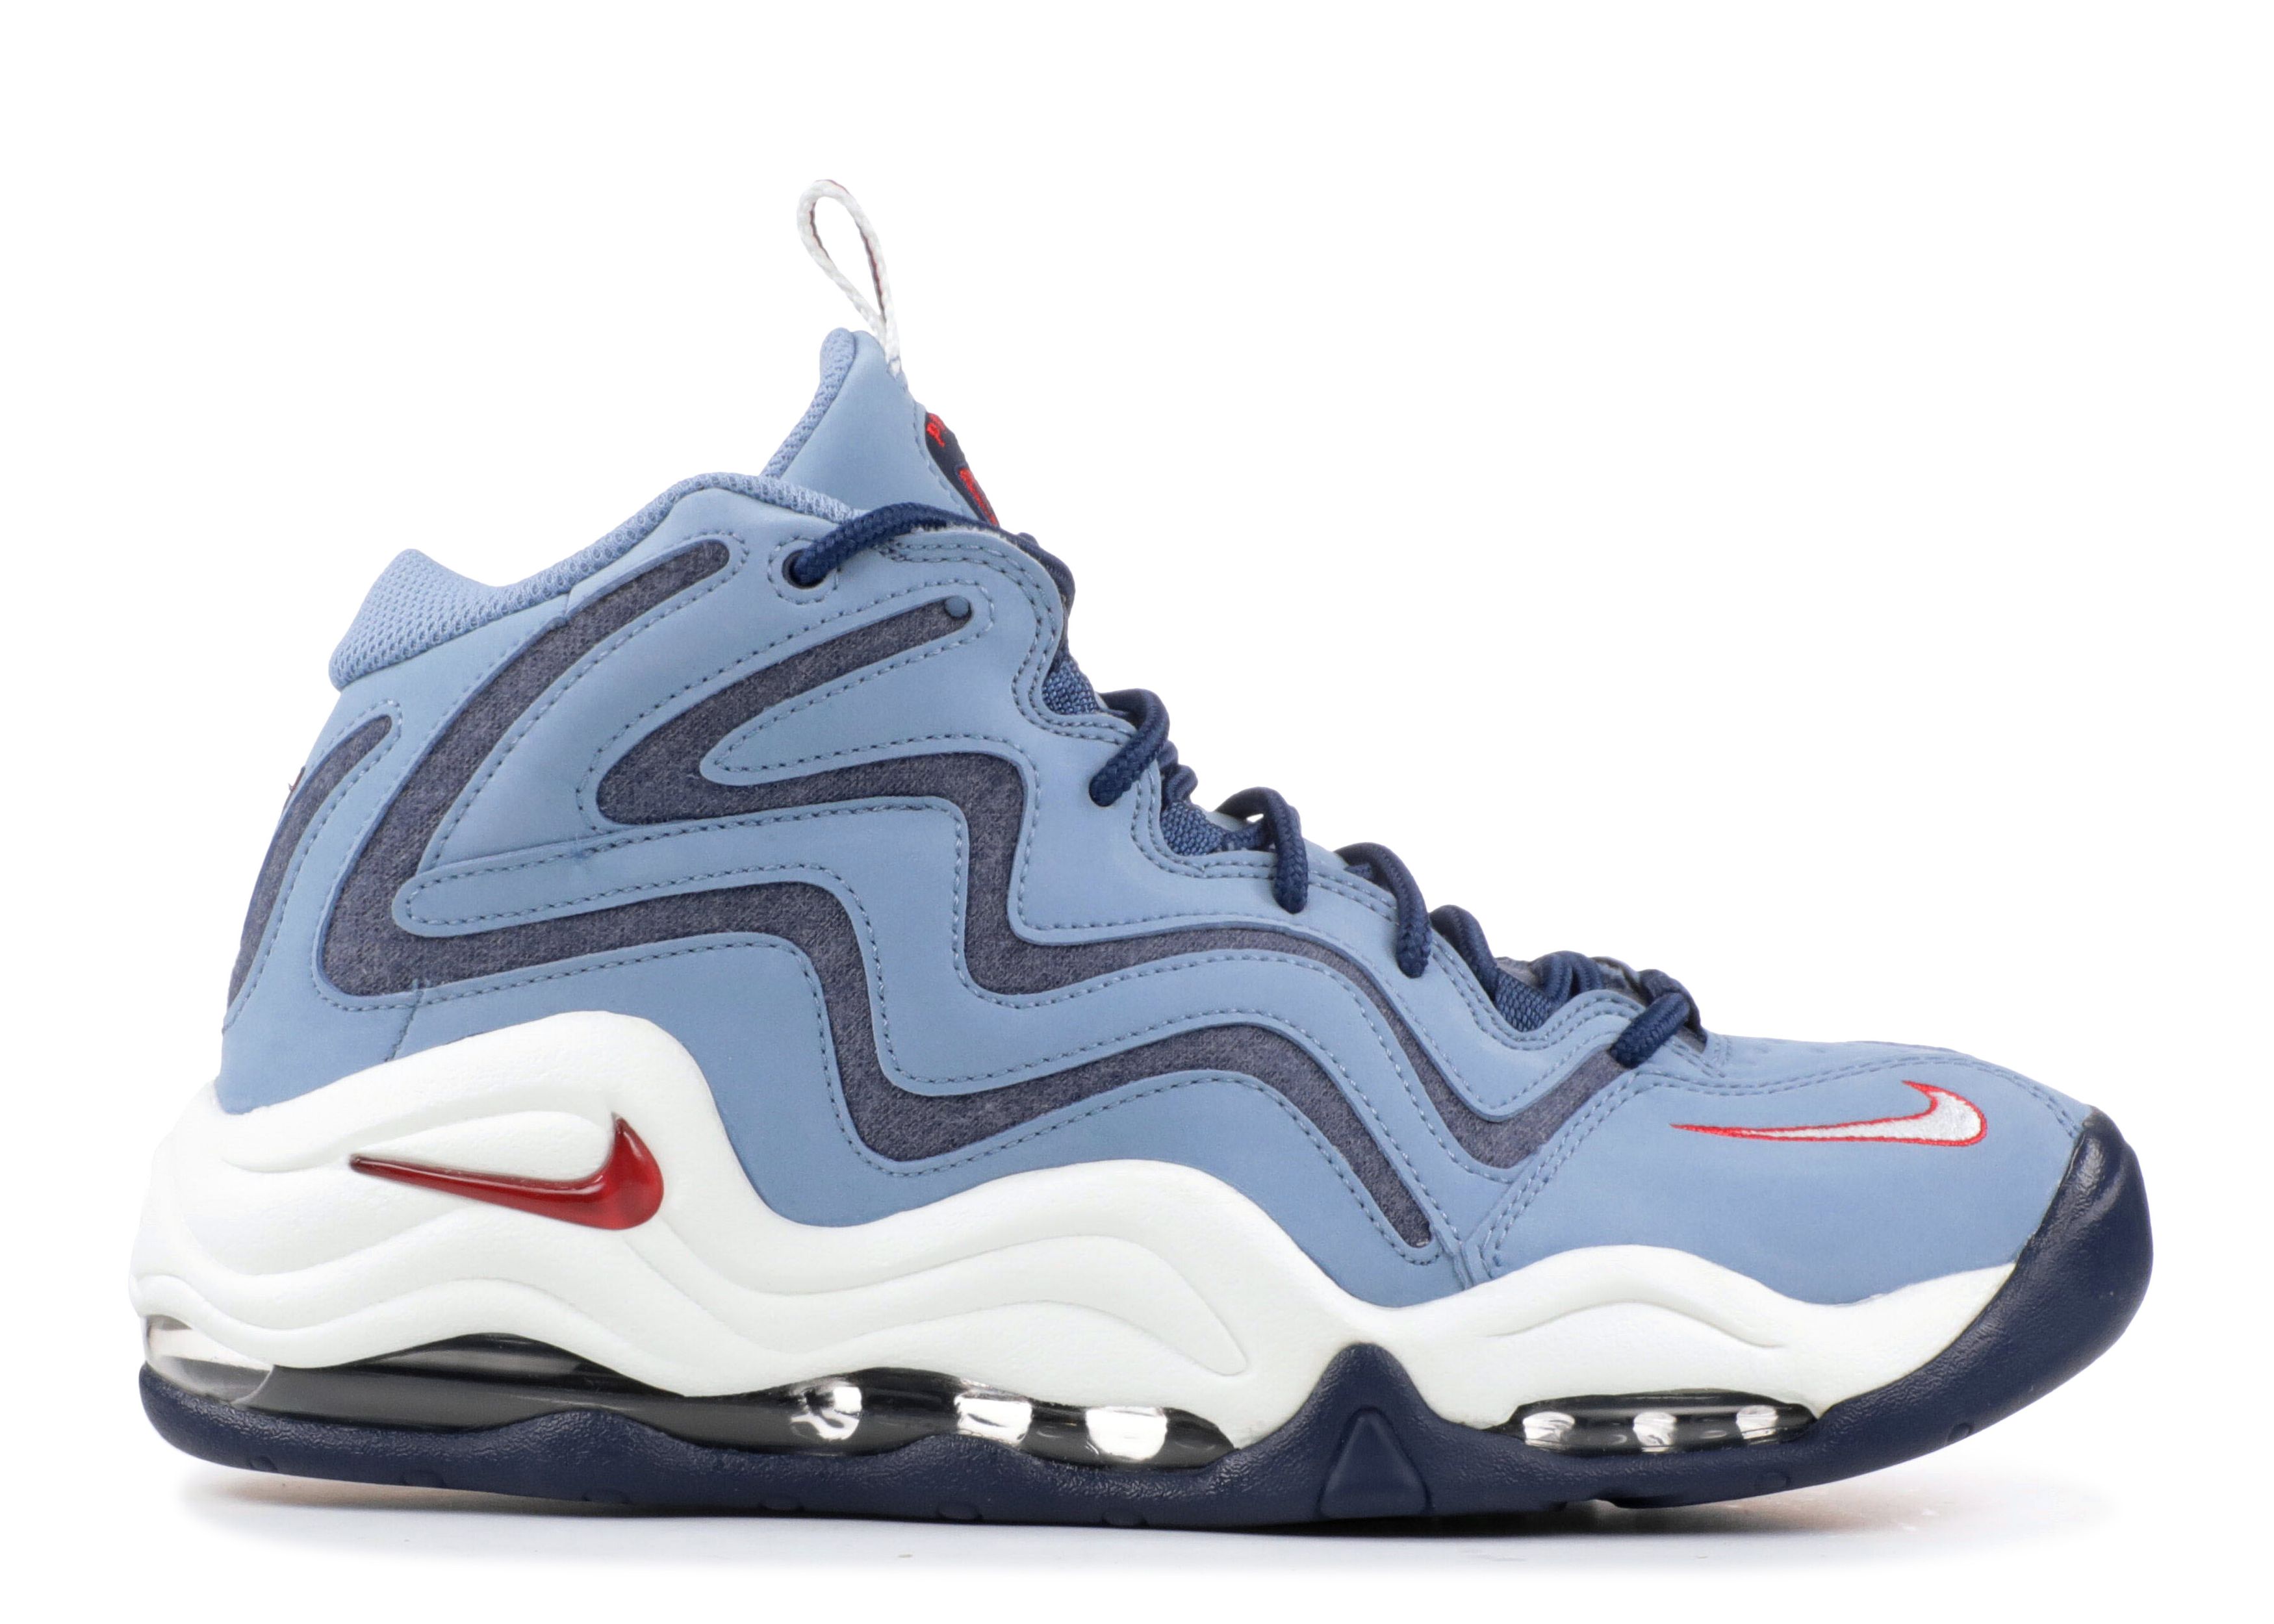 Air Pippen 1 'Work Blue' - Nike - 325001 403 - work blue/university red ...